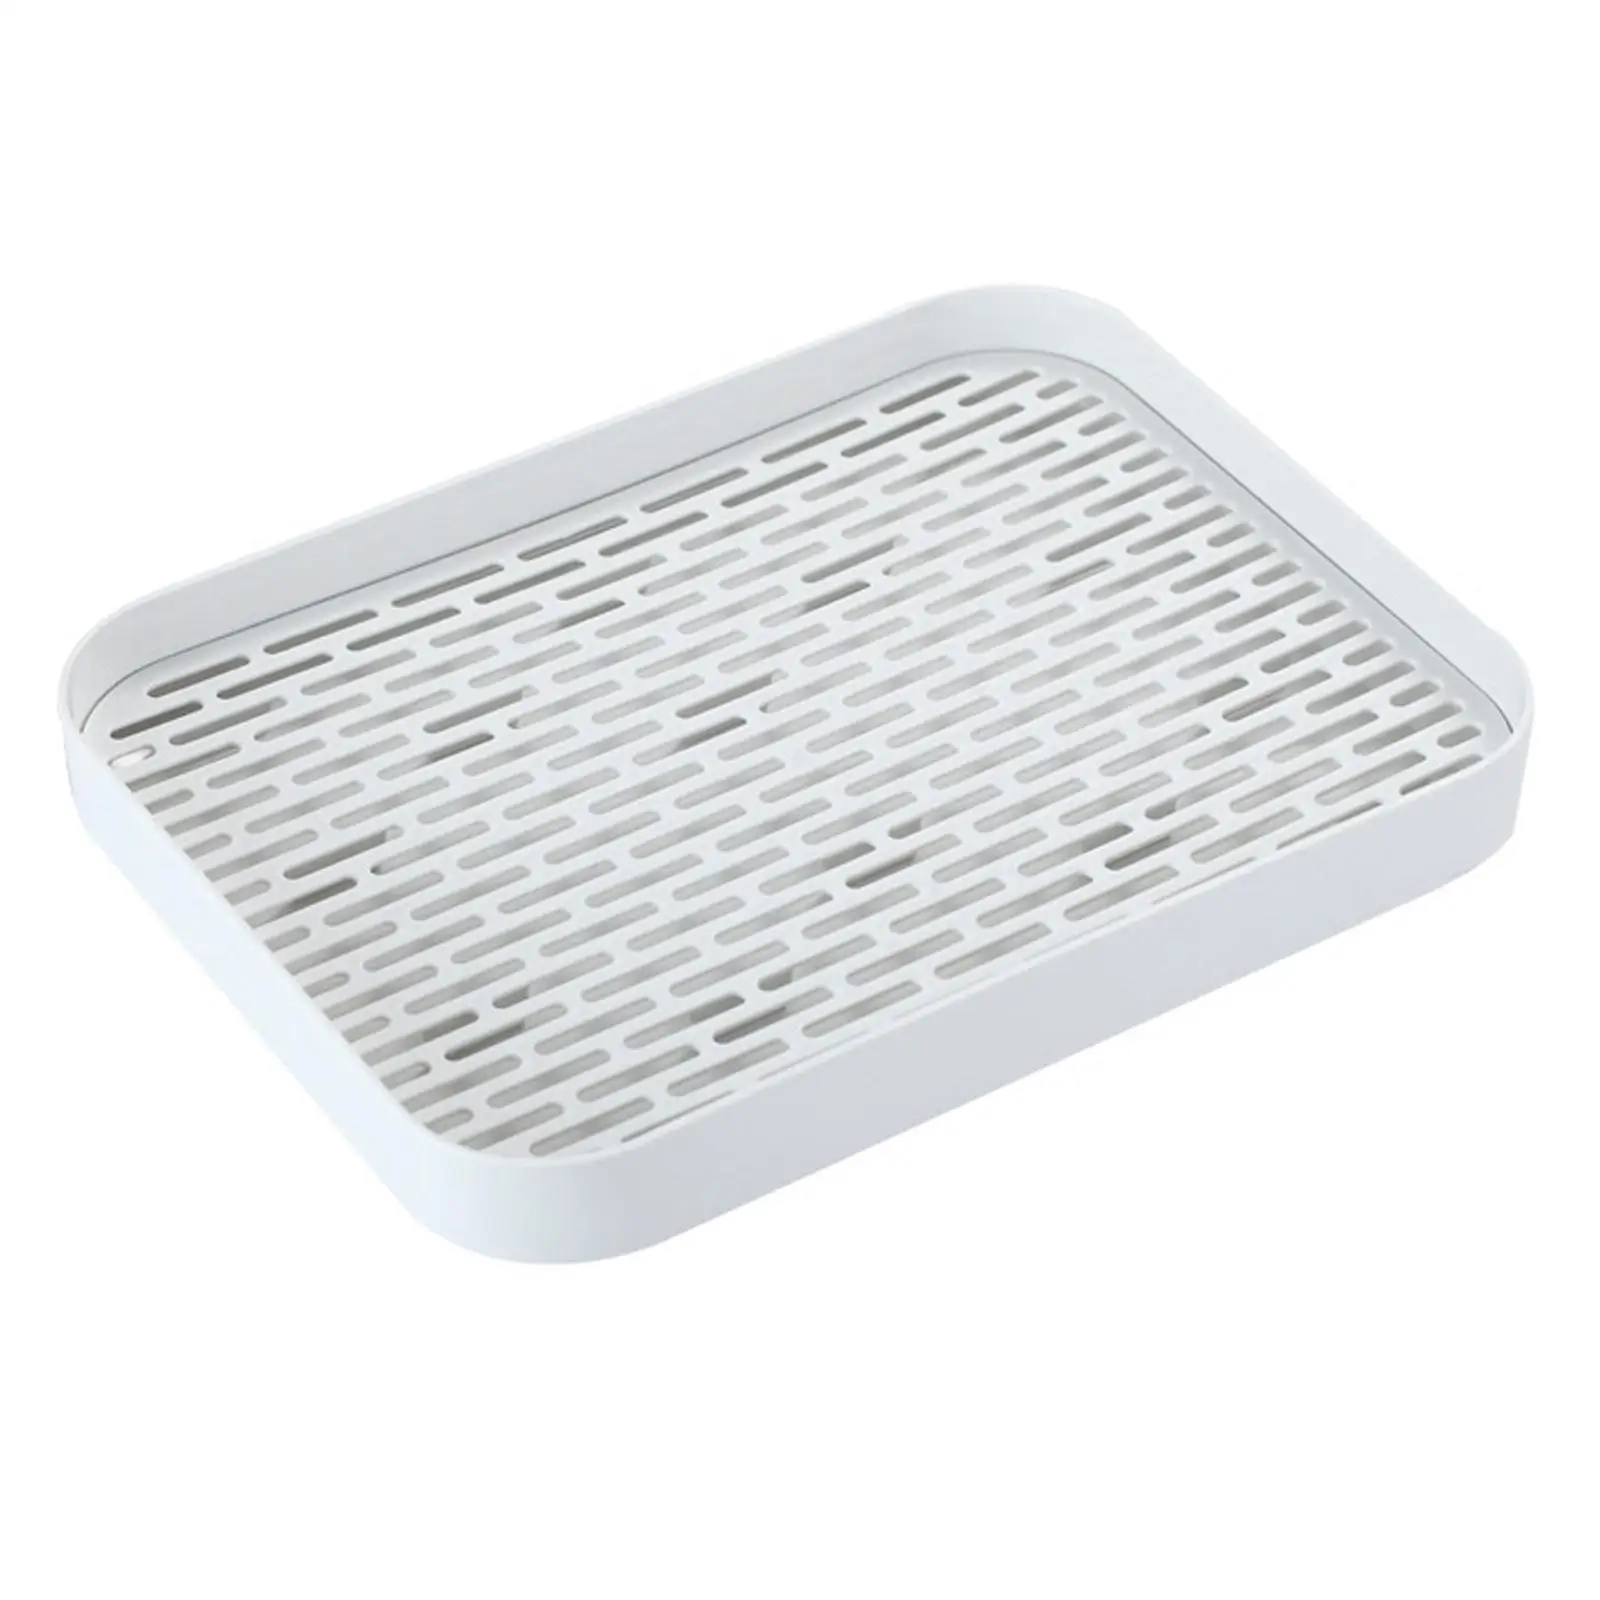 Countertop Drain Tray Drainboard Drainer Shelf Basket for Cup Home Kitchen